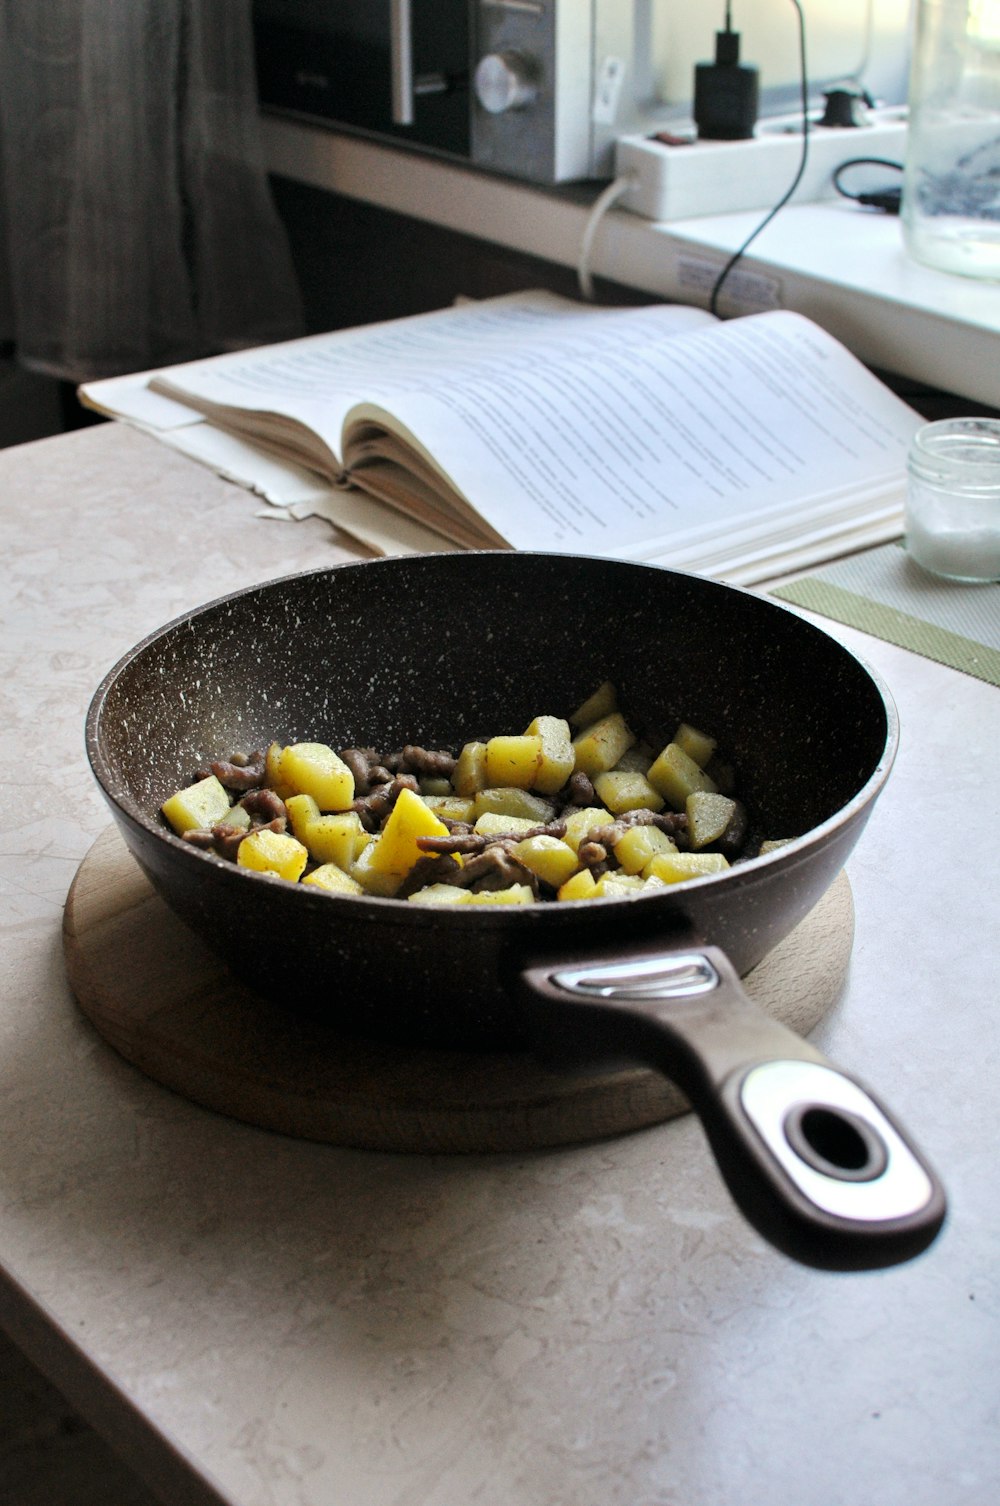 black frying pan with yellow and brown food